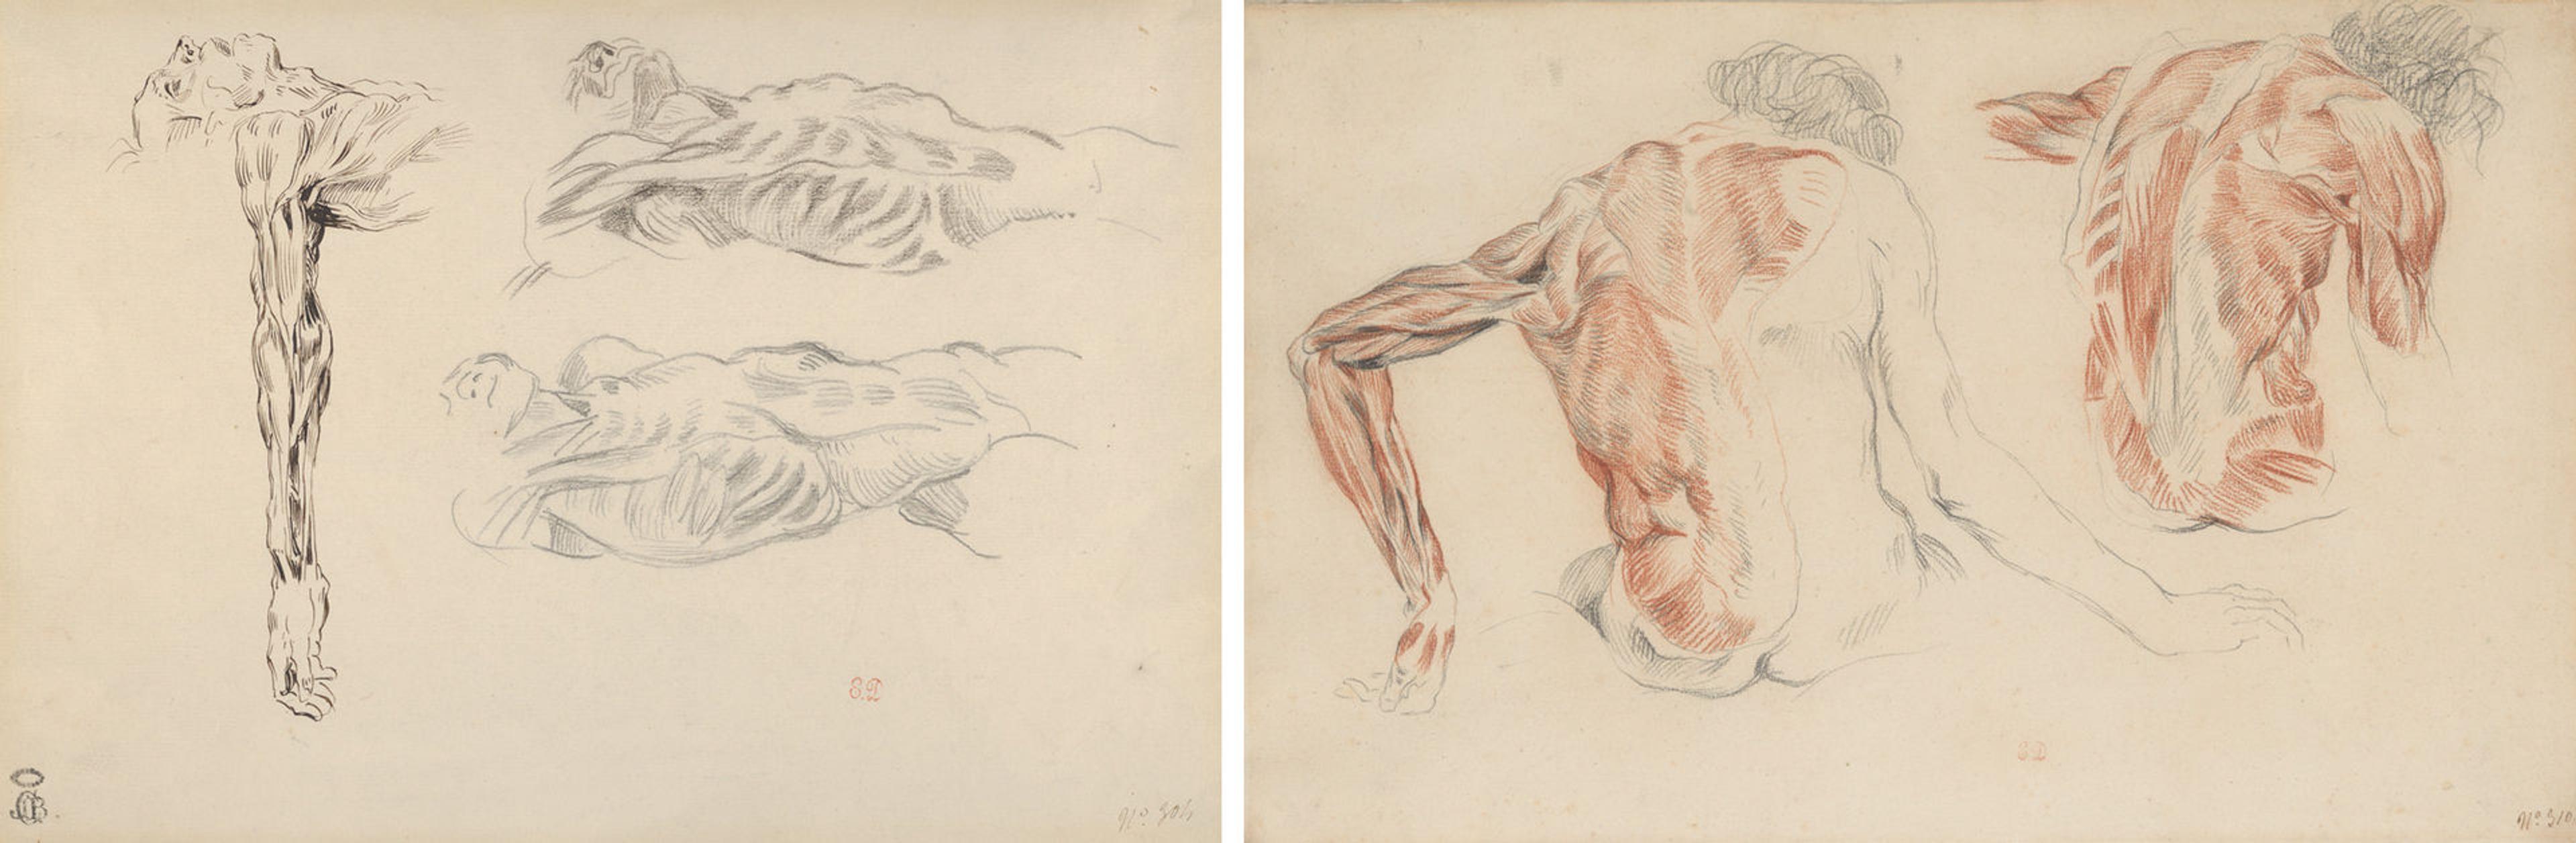 Two drawings of cadavers by Delacroix